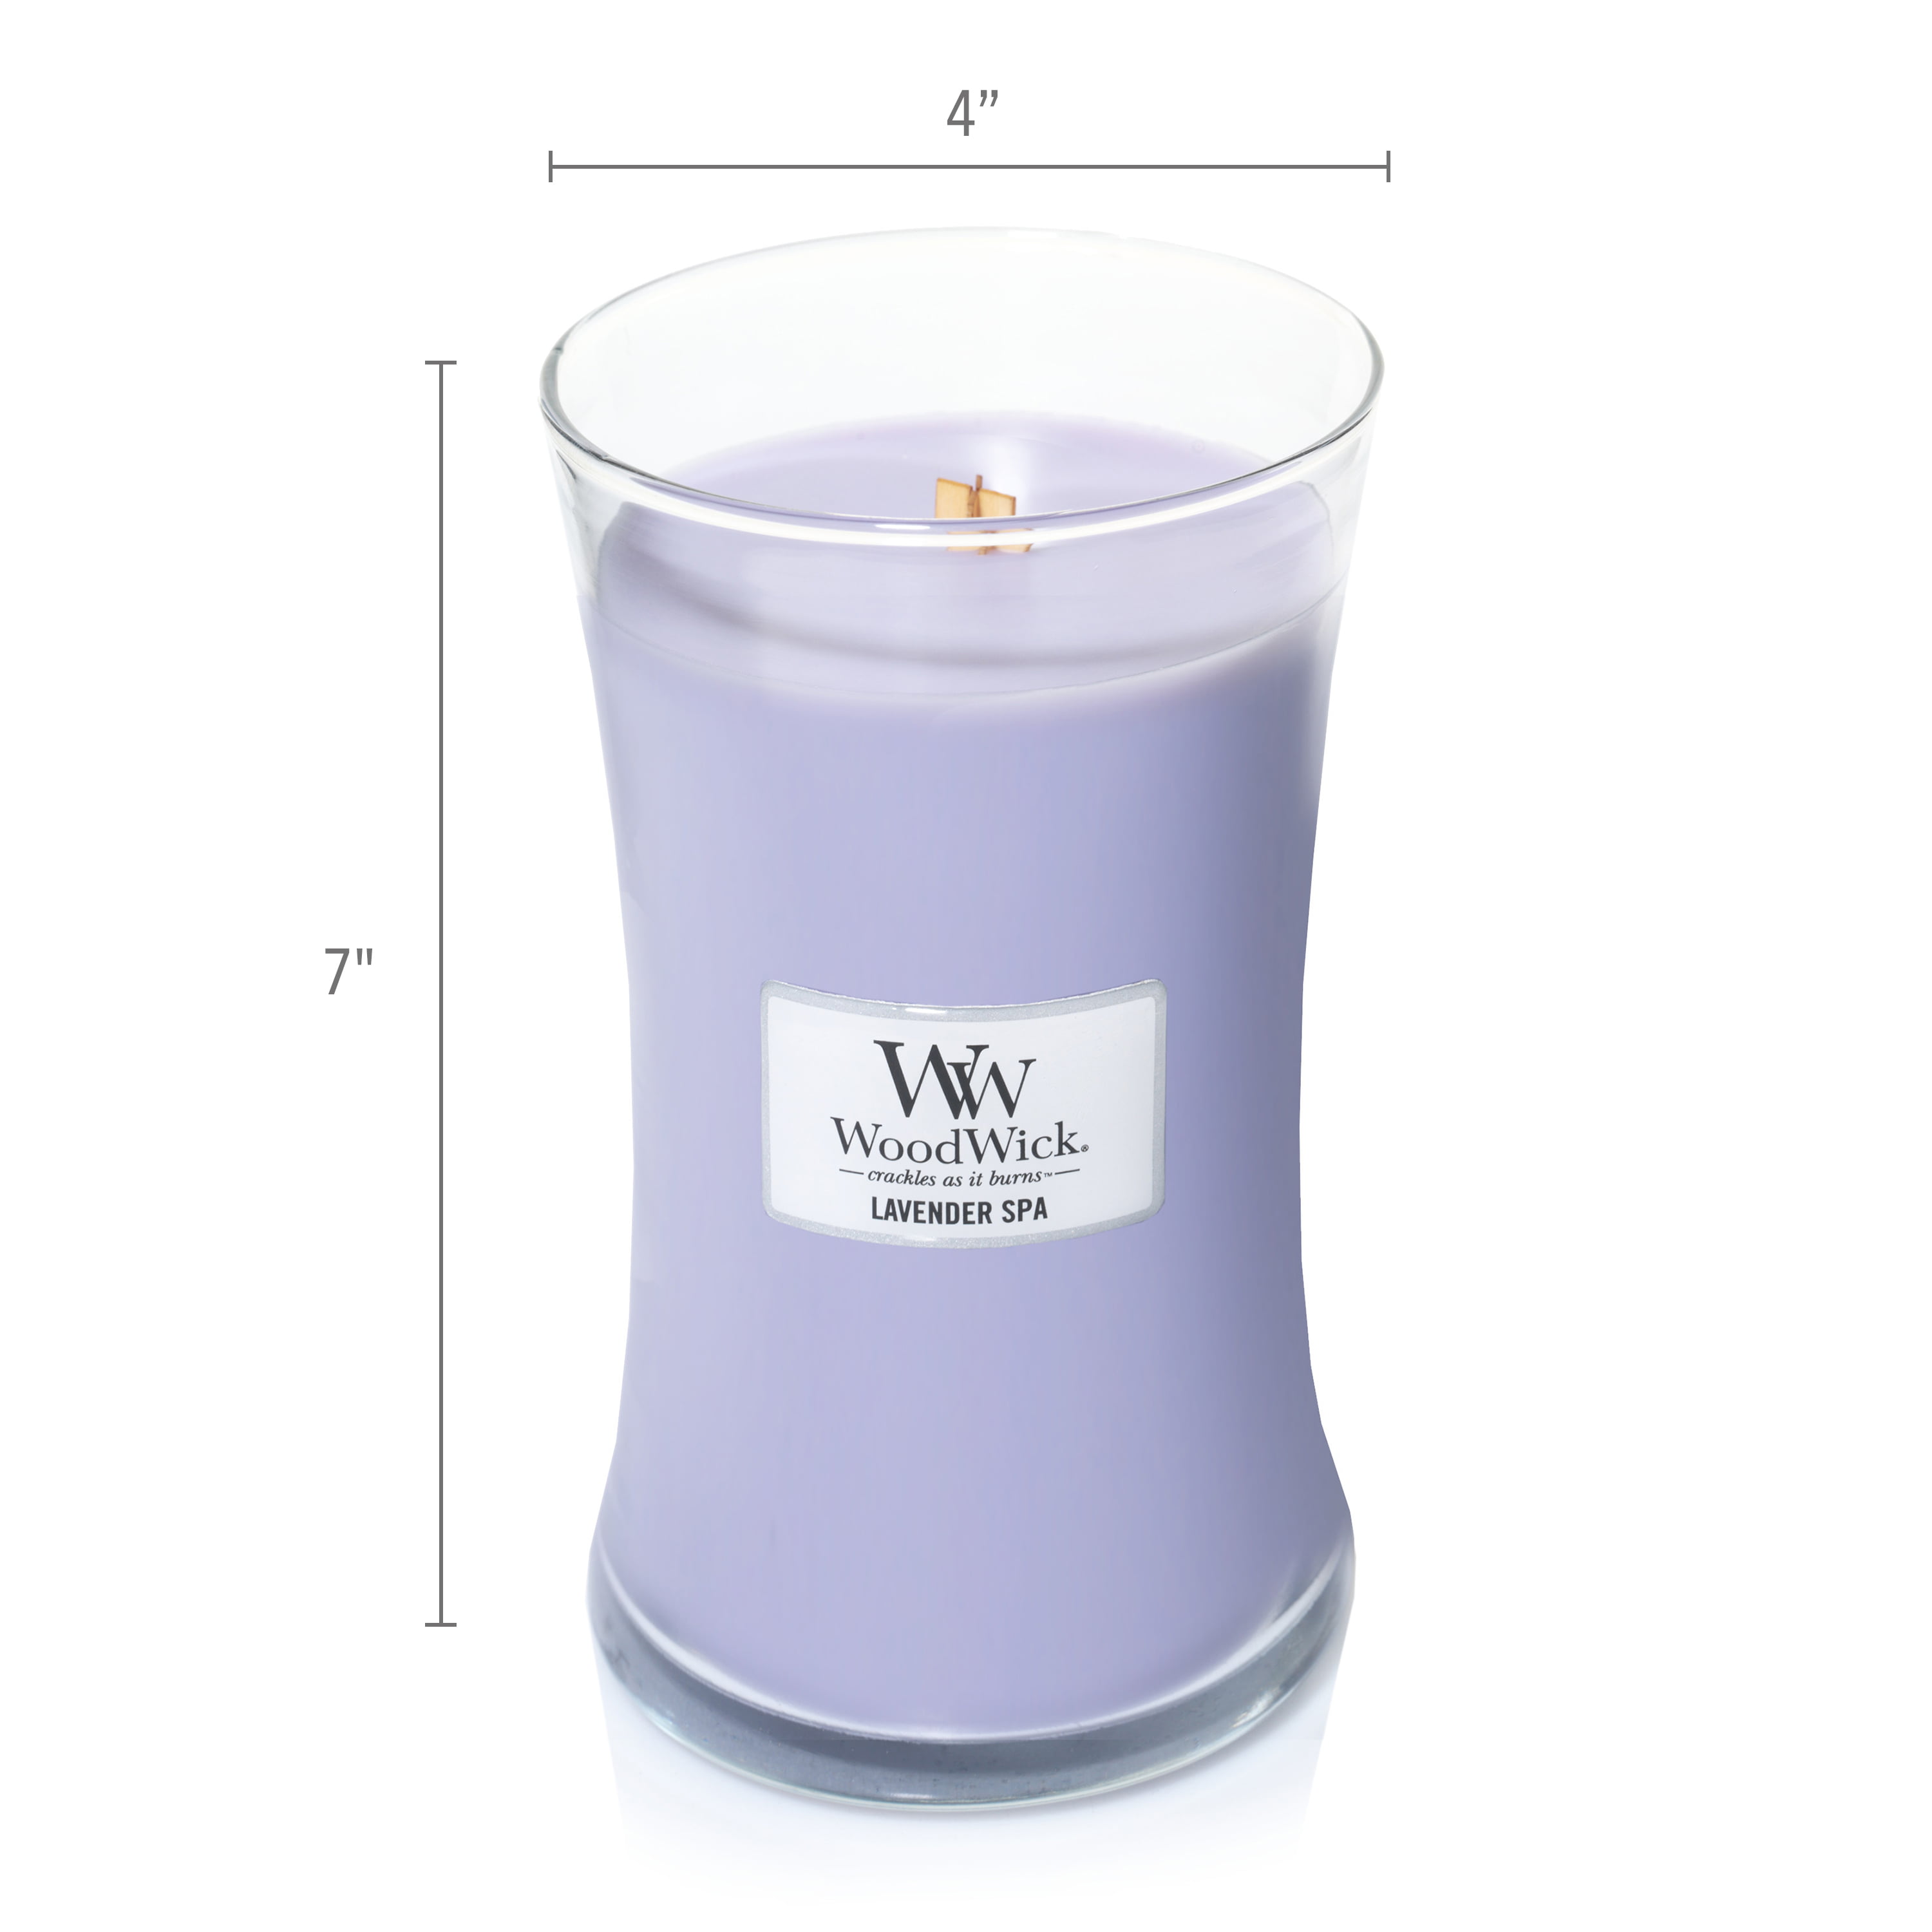 Woodwick Lavender Spa Large Hourglass Candle Walmart Com